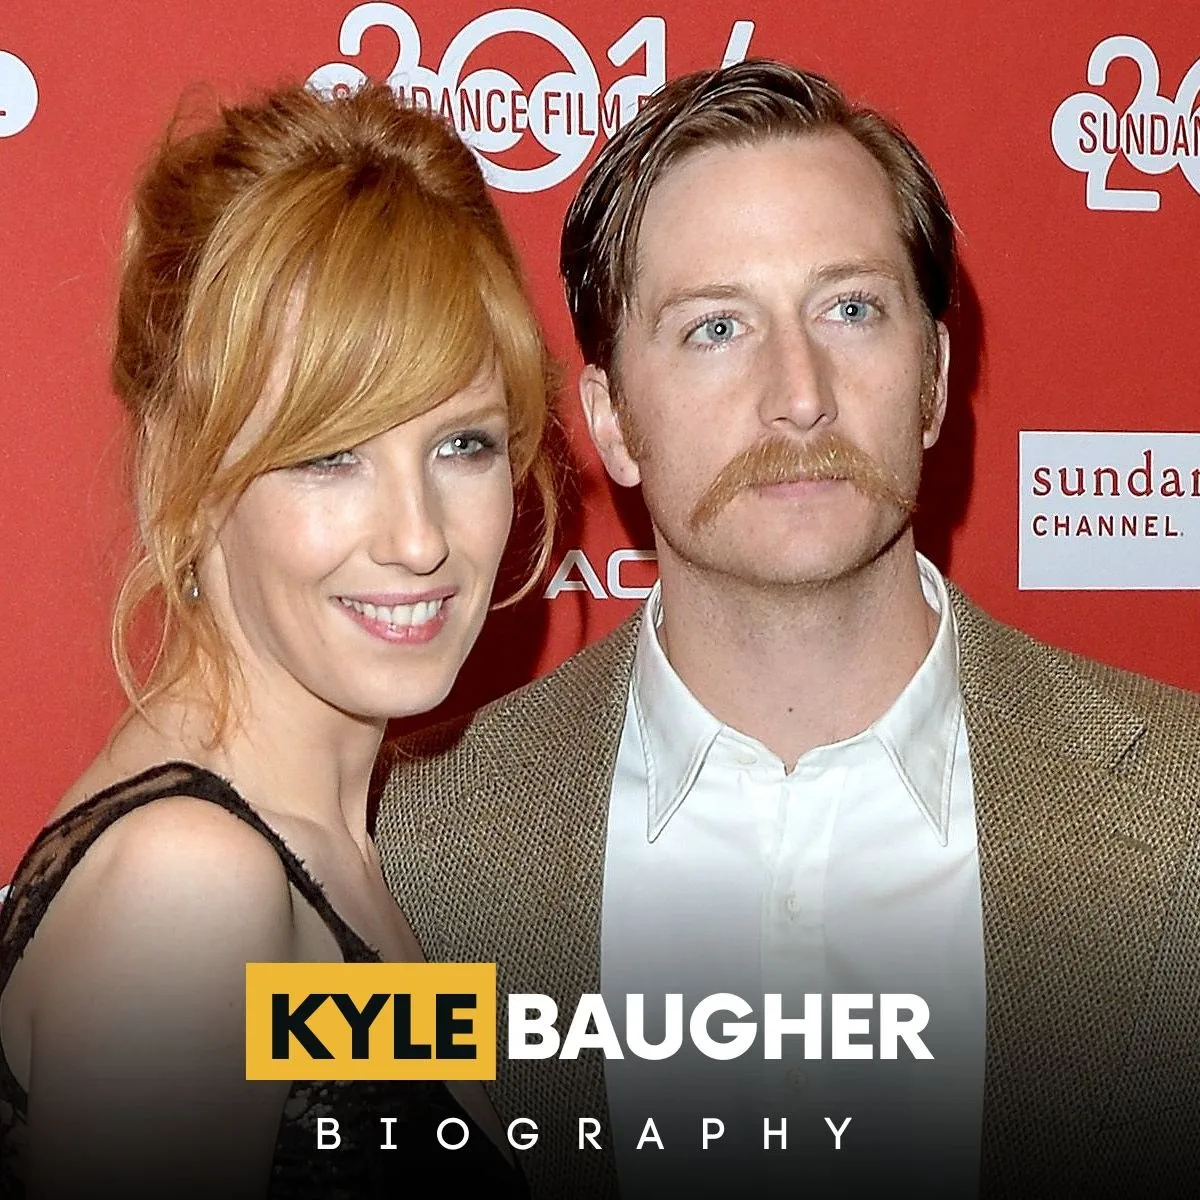 All About Kelly Reilly’s Husband, Kyle Baugher: Net Worth, Age, Love Life & More